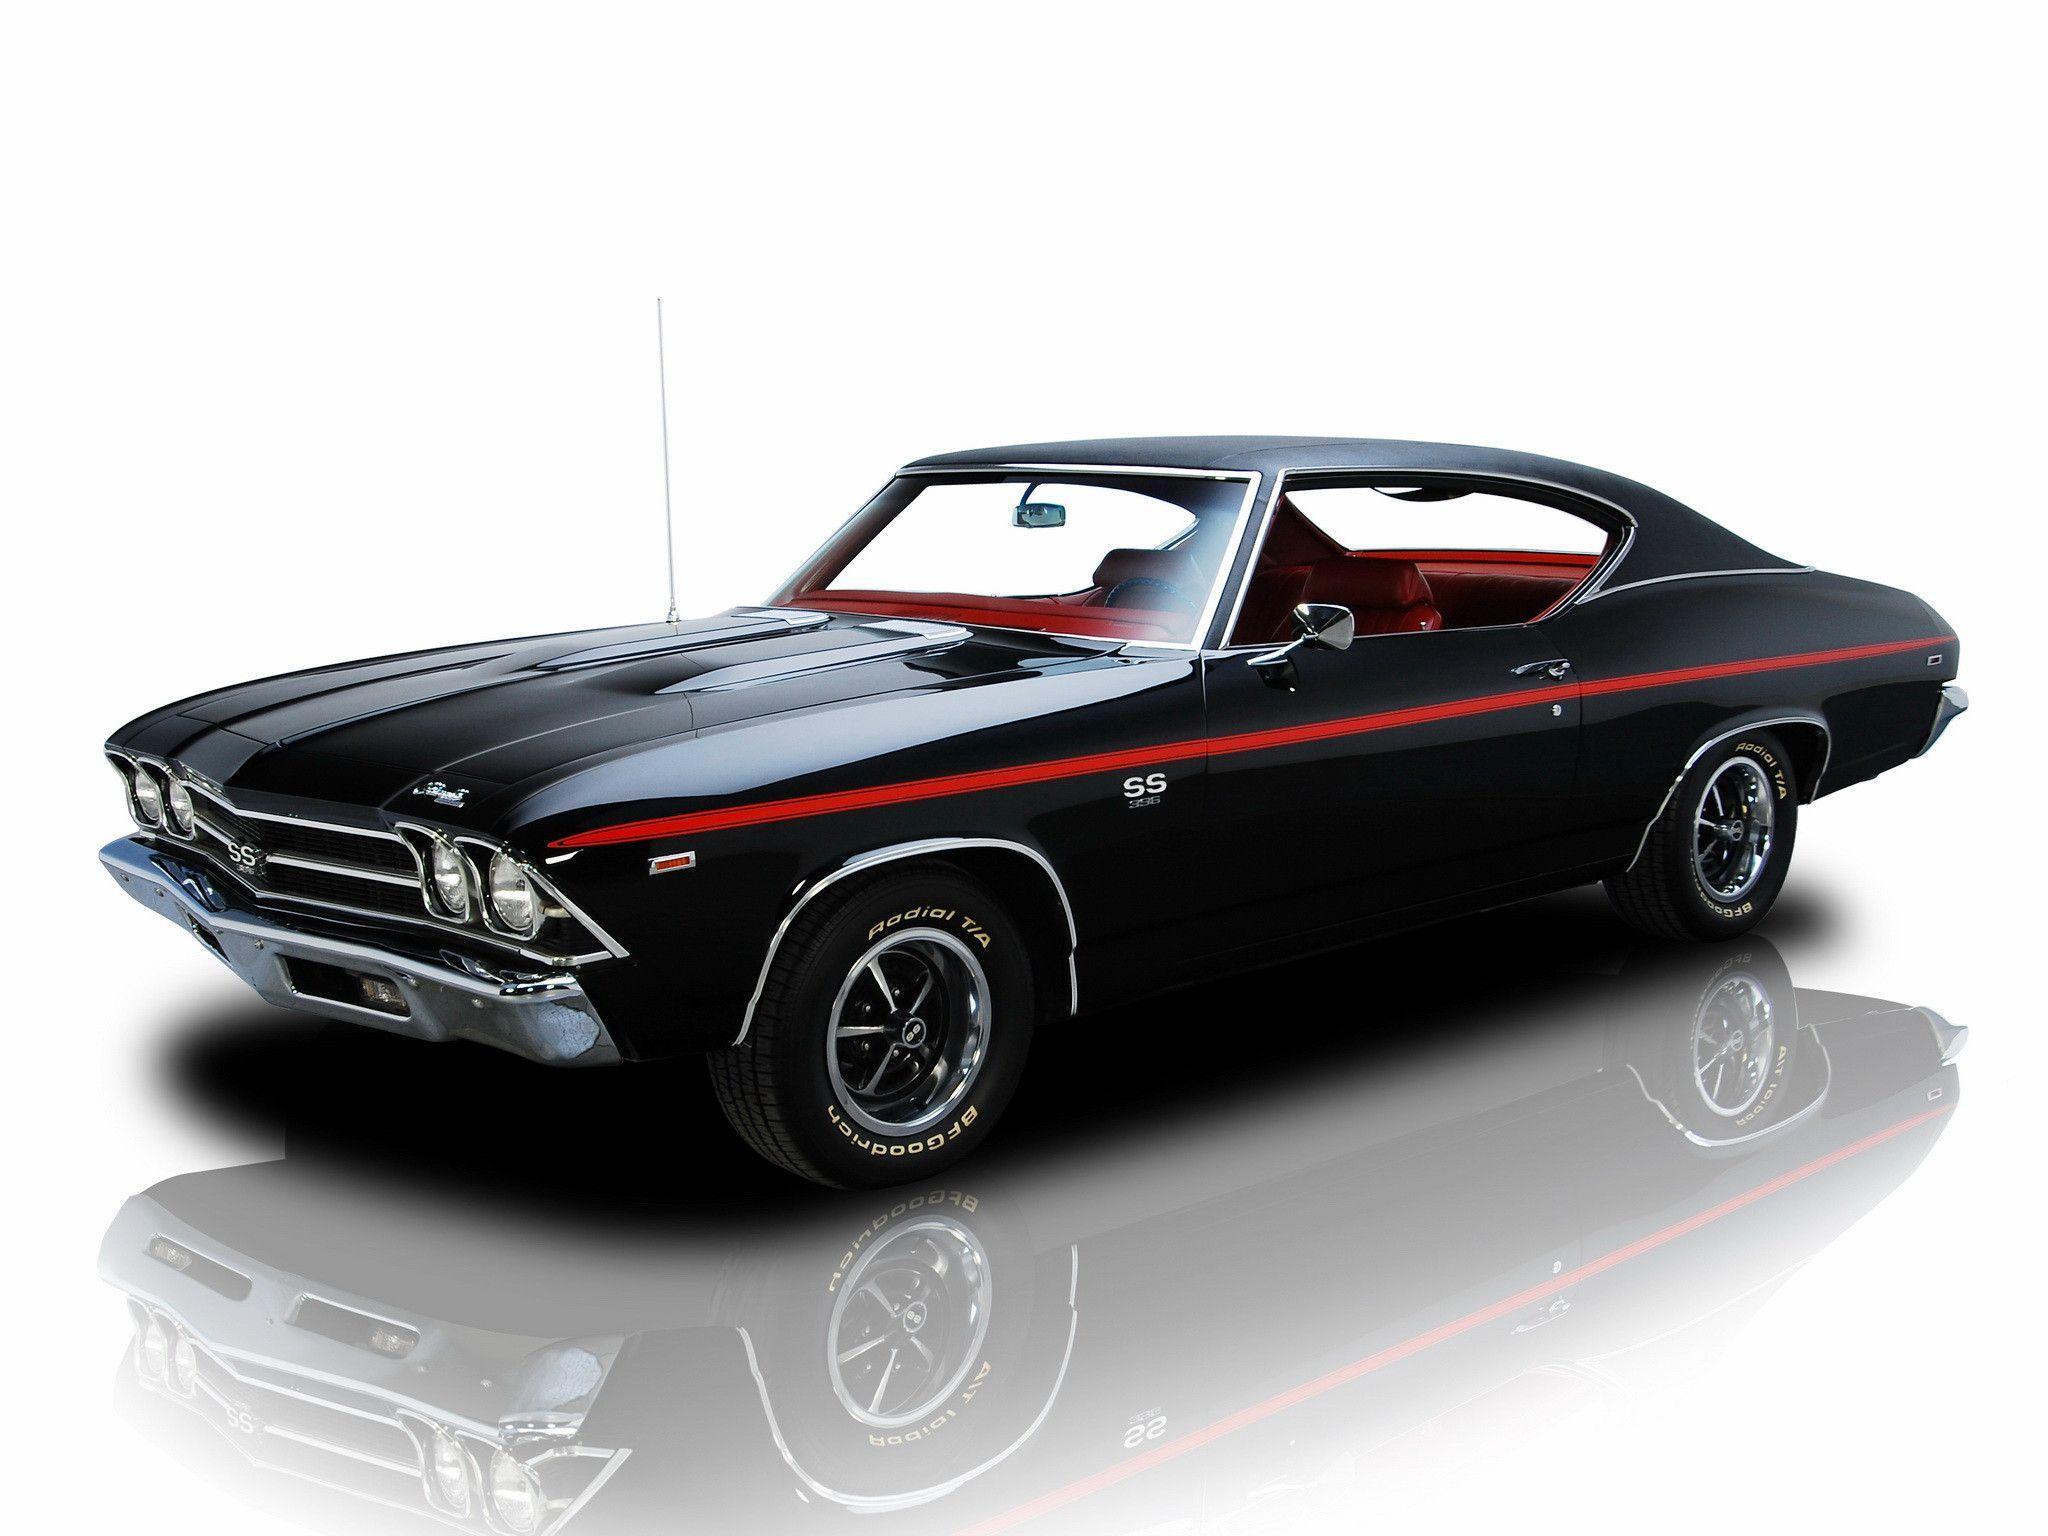 Wallpaper Of Chevrolet Chevelle Ss 396 Hardtop Coupe 1969 Car